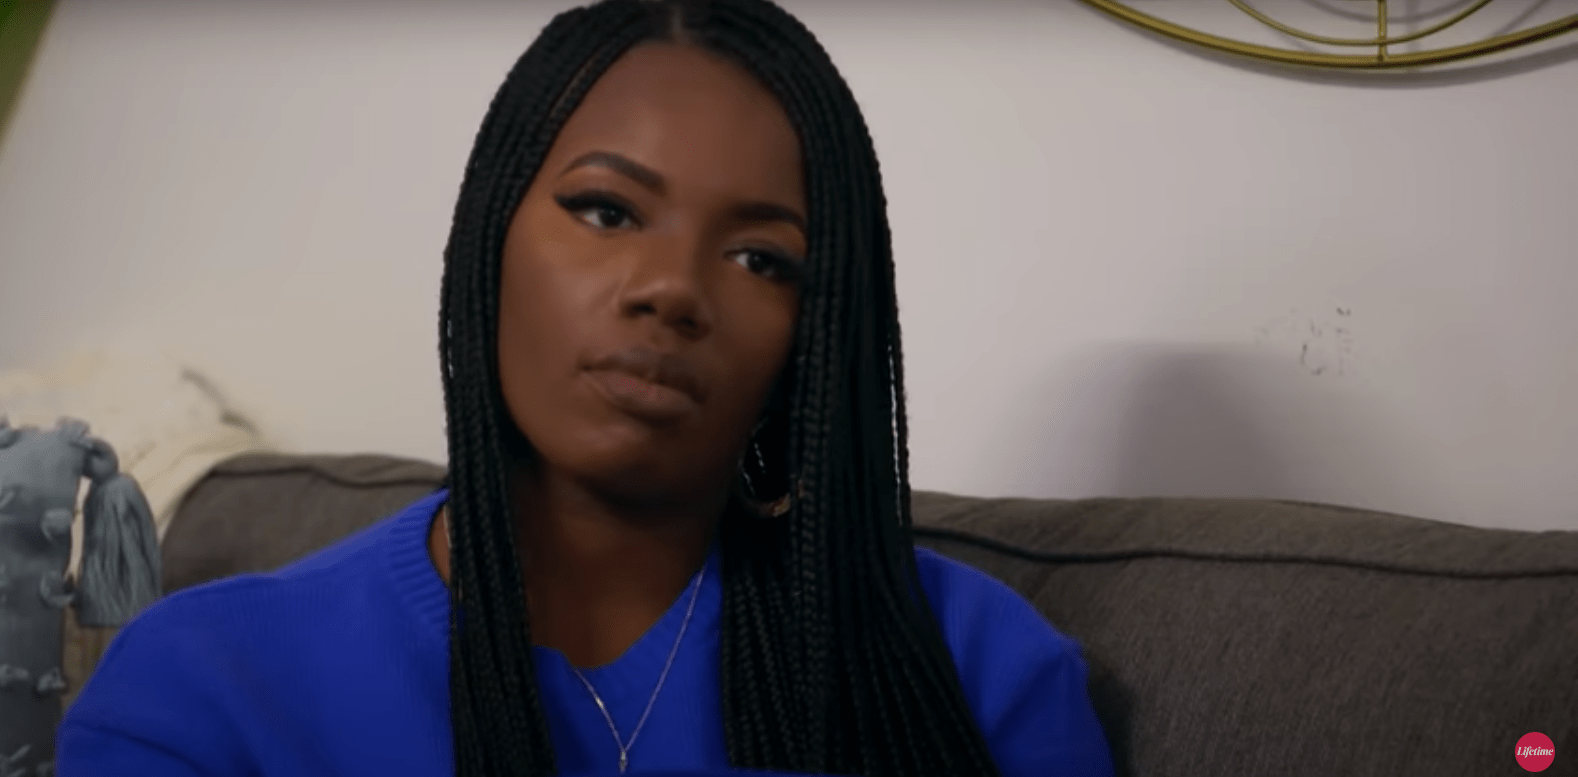 Alexis appears somber on 'Married at First Sight' Season 15